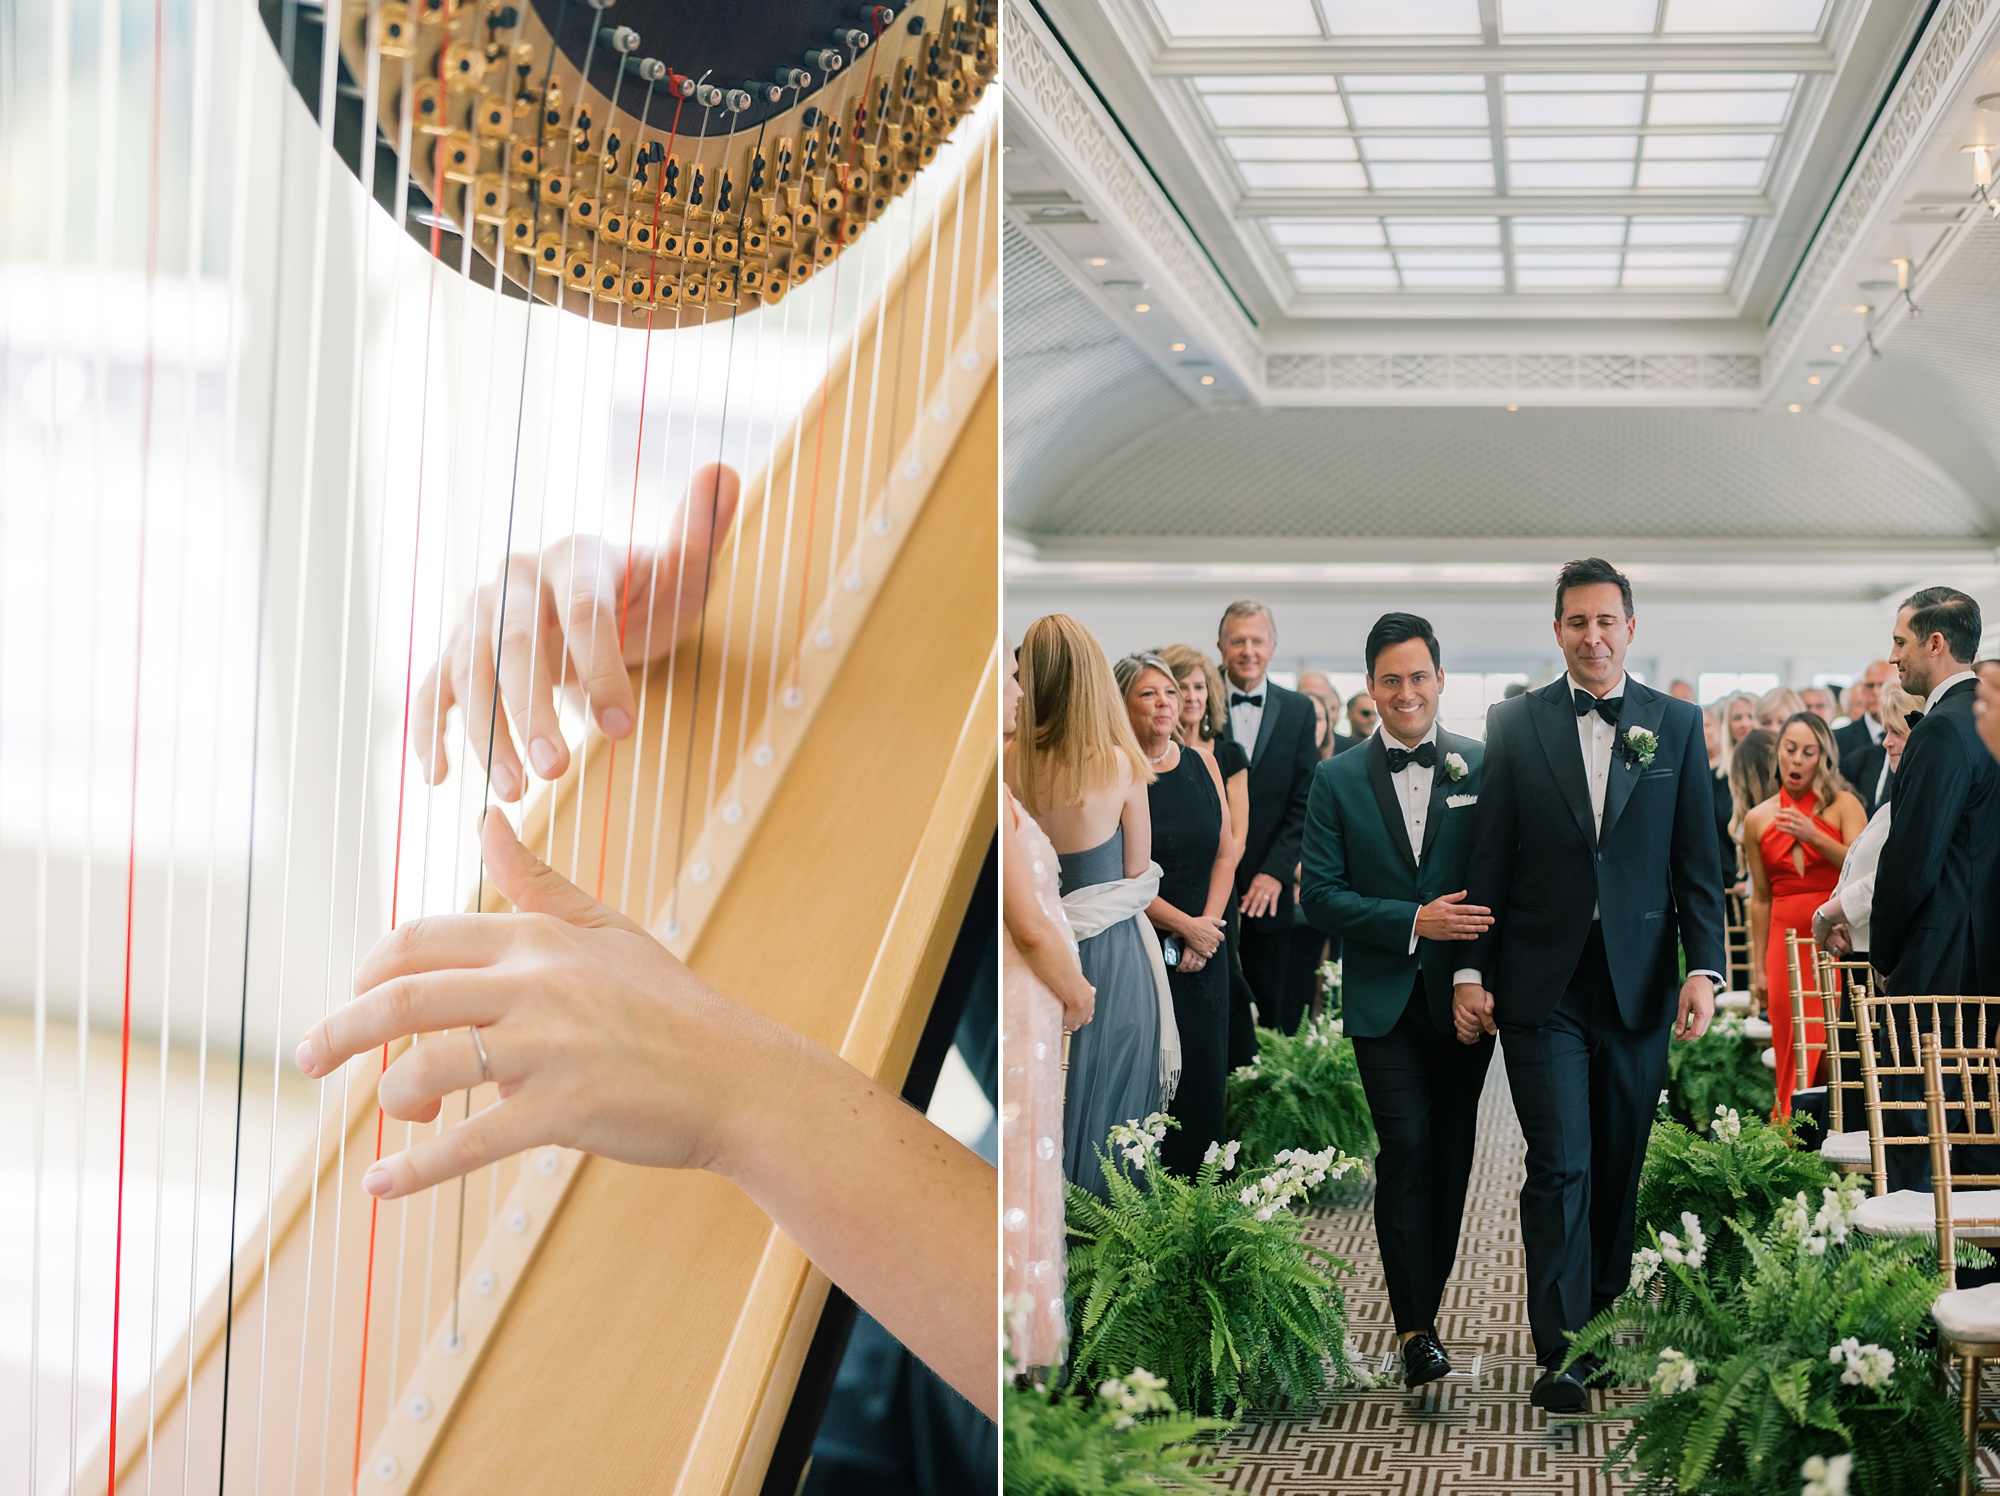 grooms walk down aisle while harpist plays during ceremony at the Hay Adams Hotel